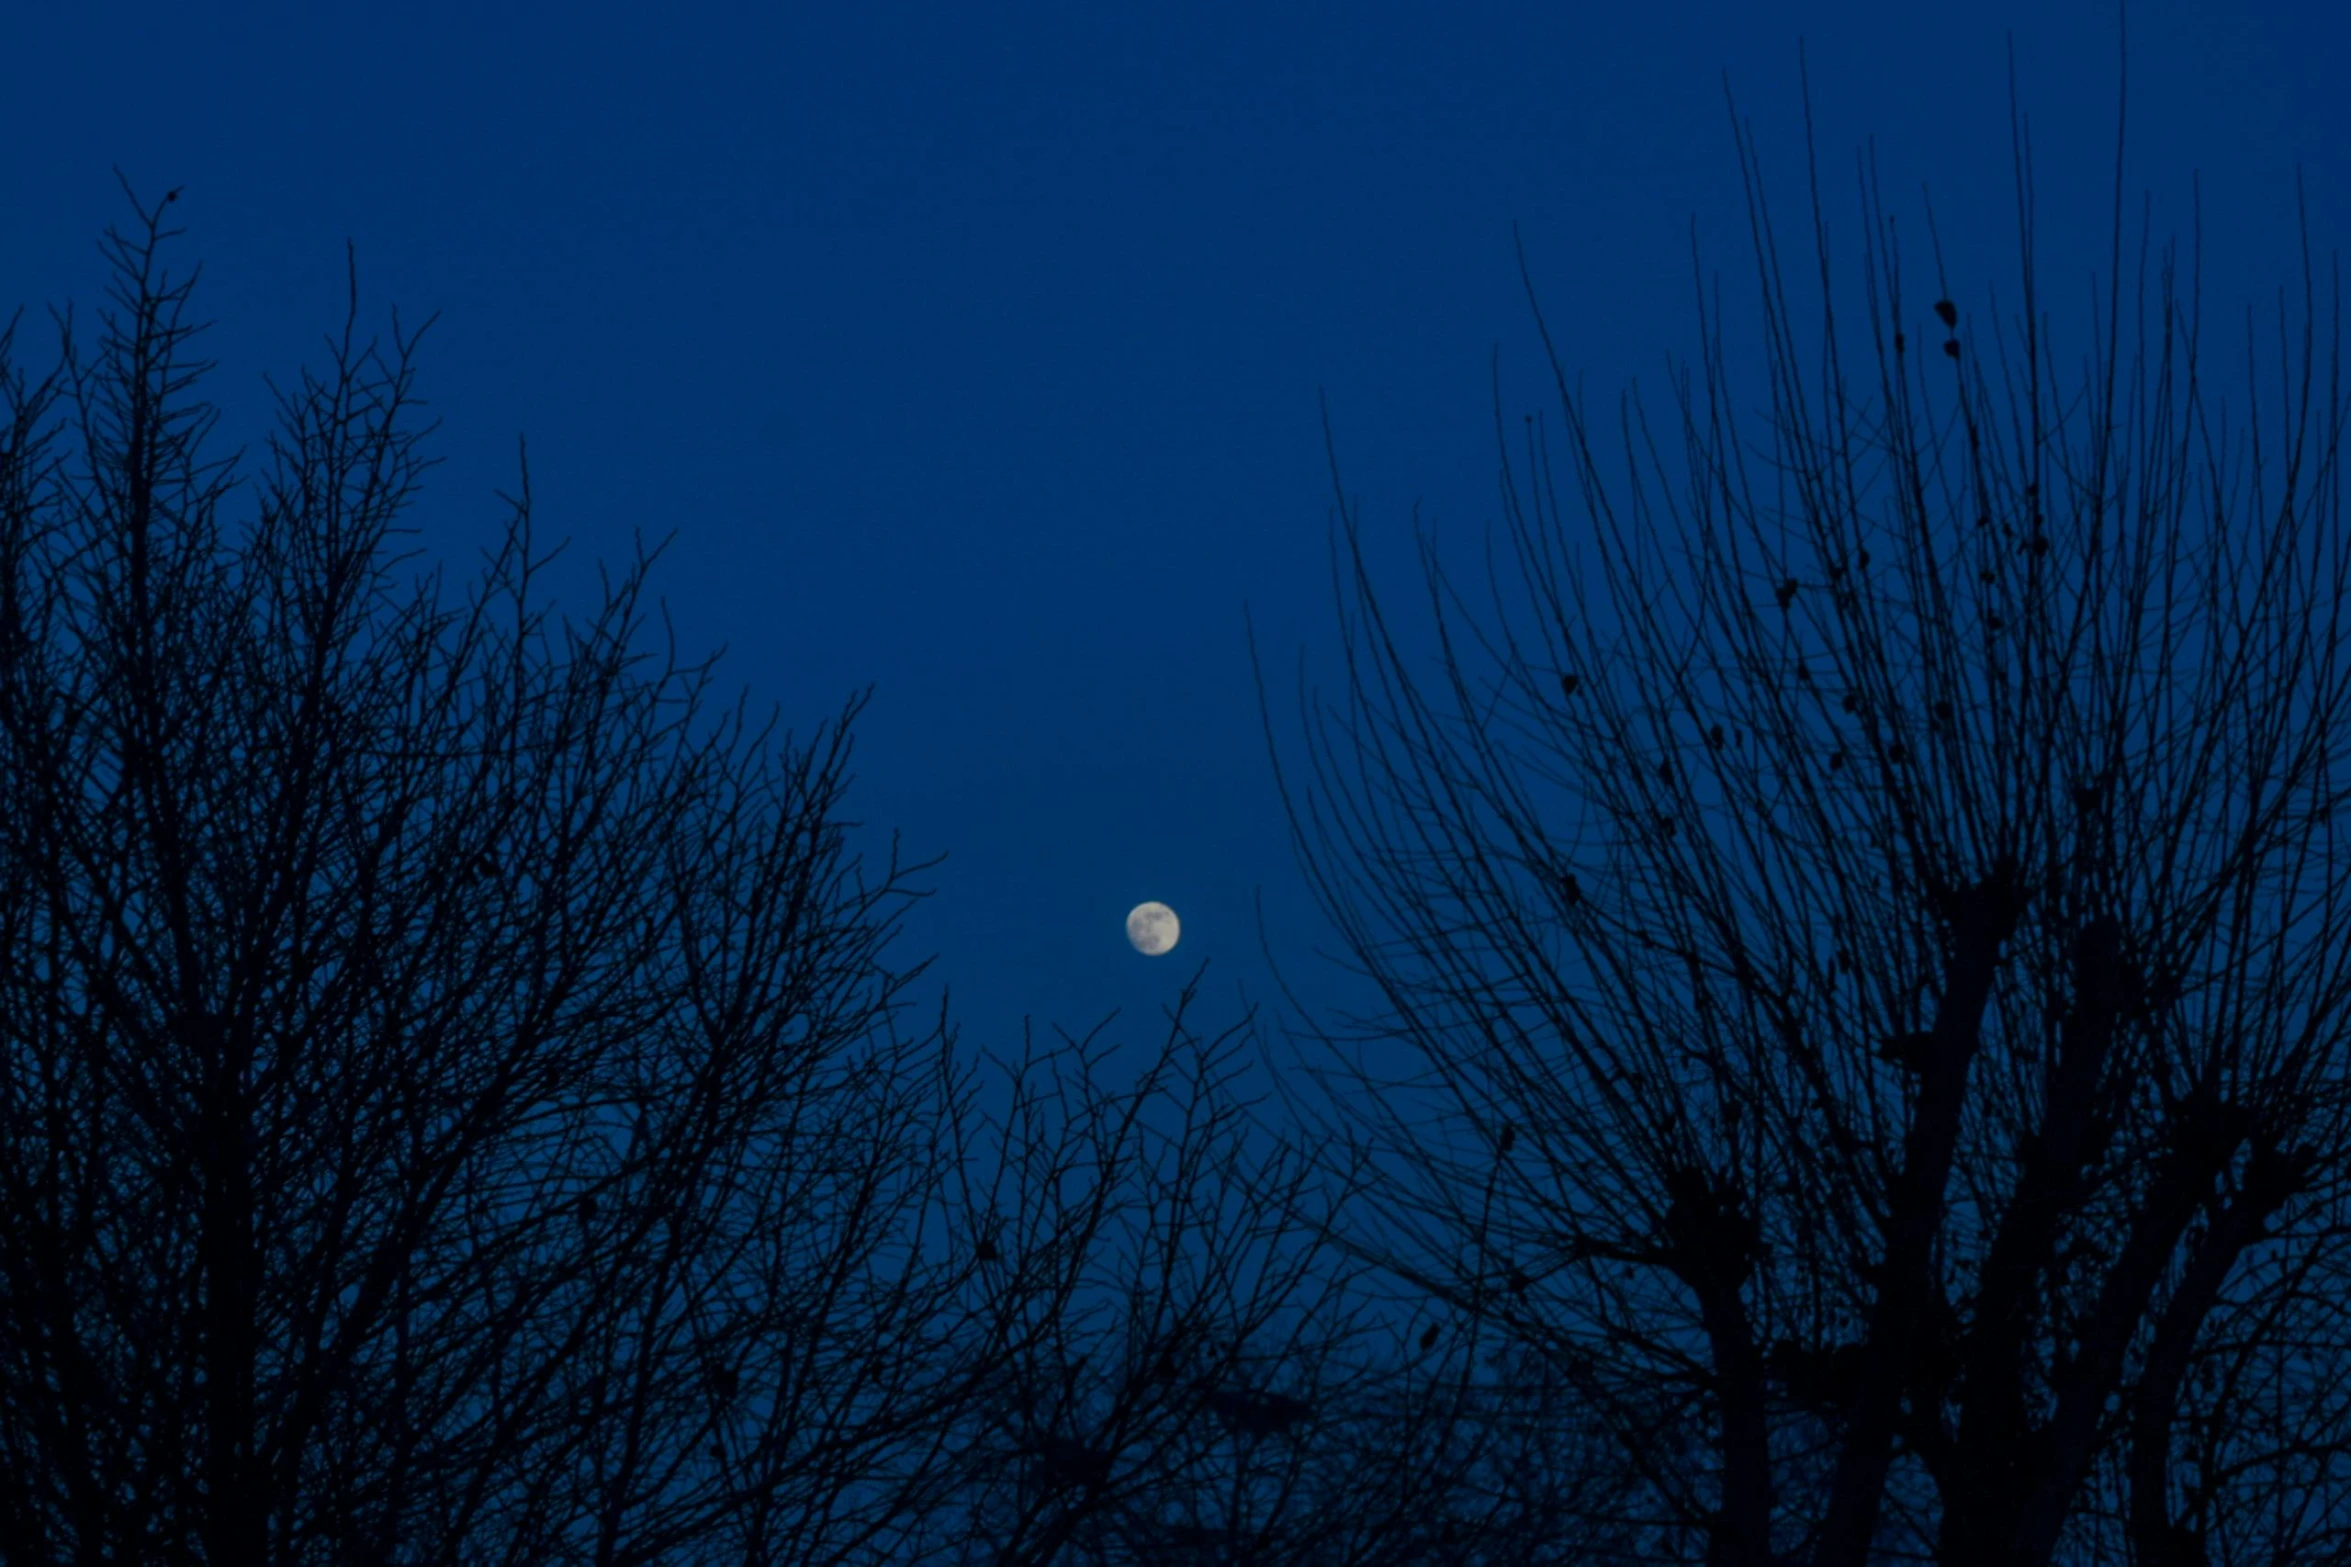 the moon is rising in a full moon sky over some trees